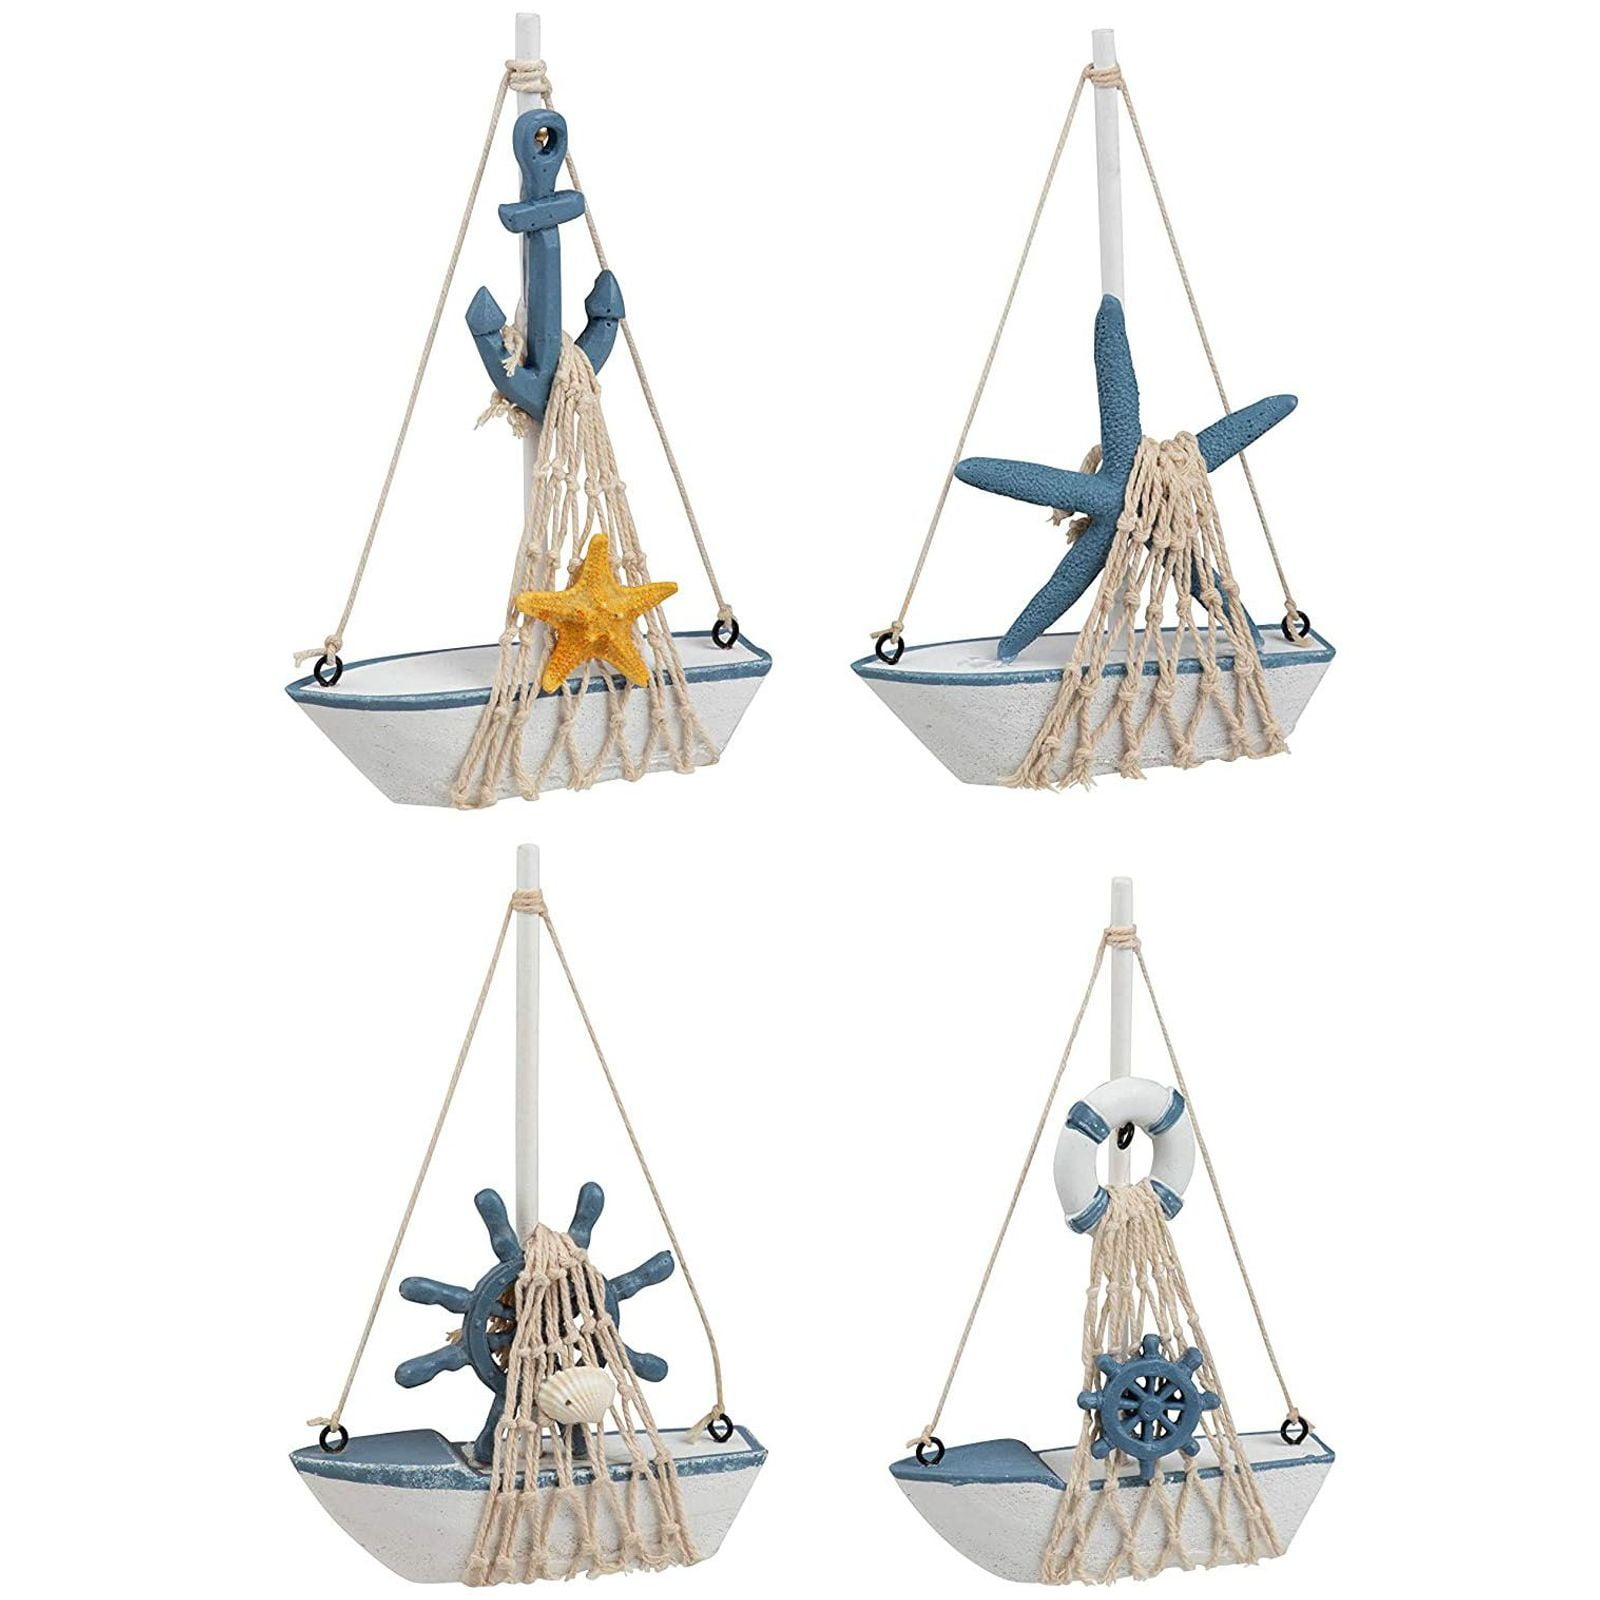 Nautical Table Ornament for Home or Boutique Decor Mini Wooden Sailing Boat 